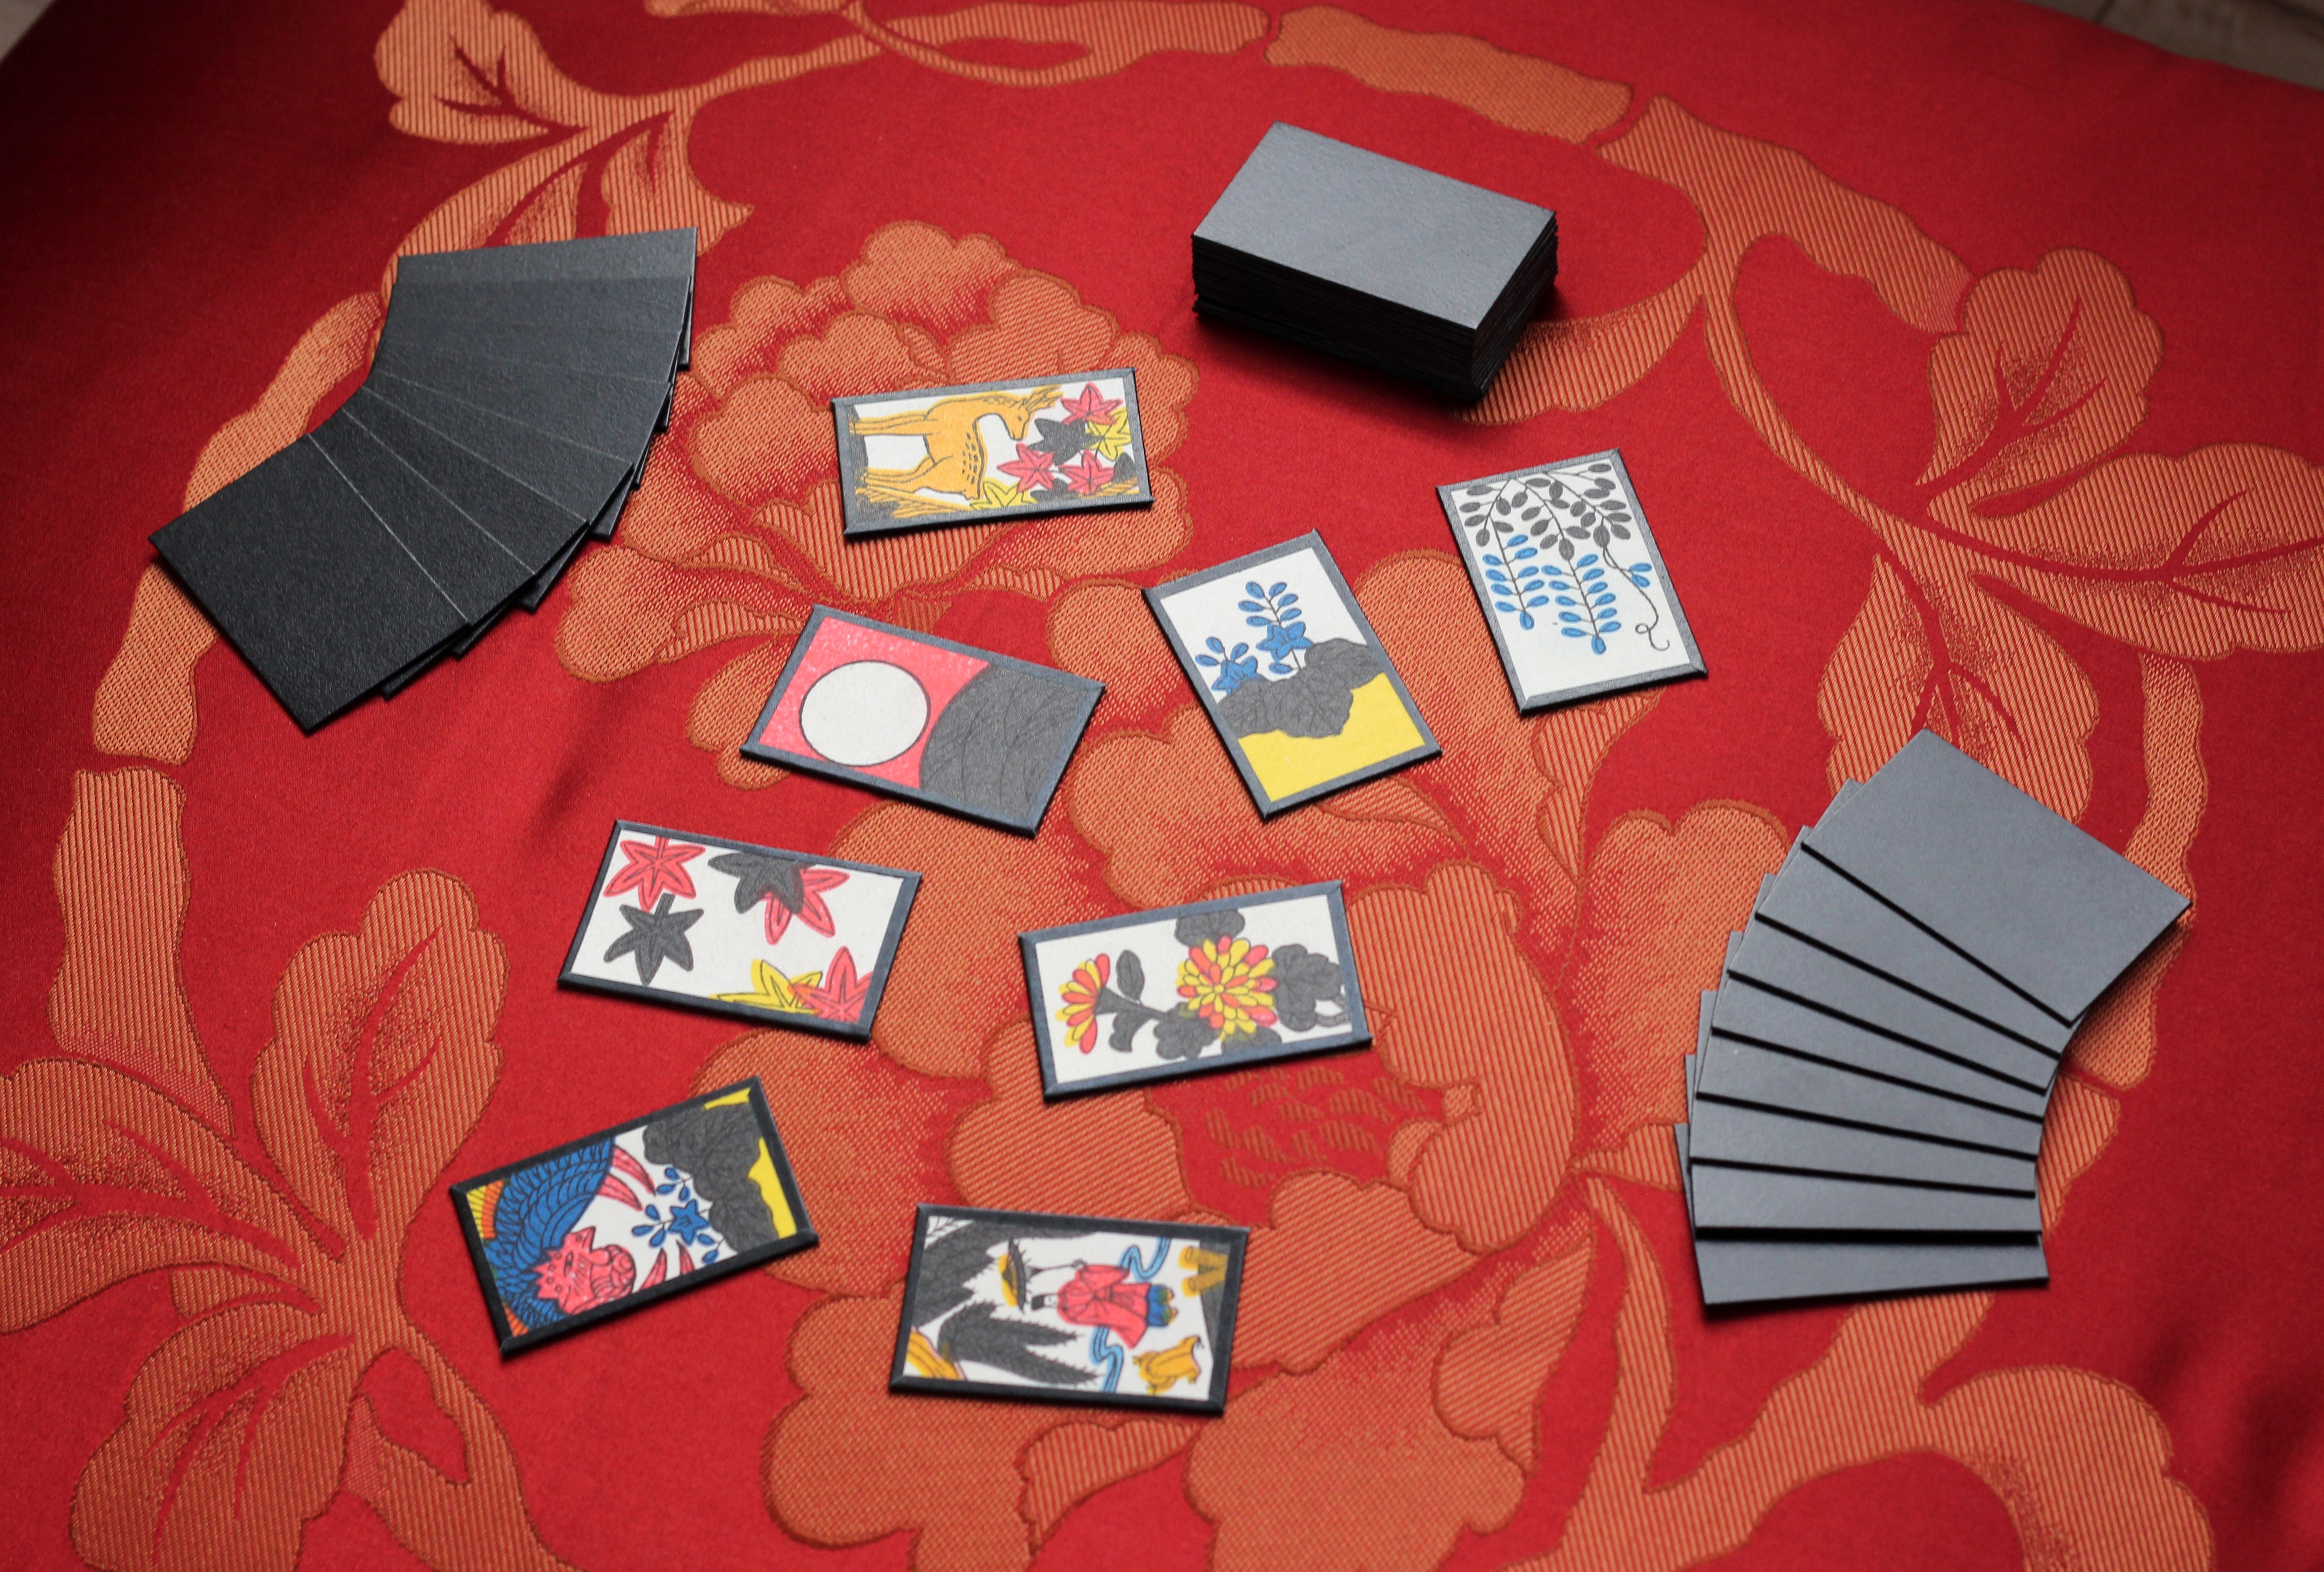 A typical setup of hanafuda cards for the game of koikoi, on top a red zabuton with a peony pattern. This set-up is called "te hachi ba hachi" - 8 cards in the hand, 8 cards in the field. The hanafuda pictured are homemade and based on a modified set of hanafuda graphics made by Louie Mantia, Jr.